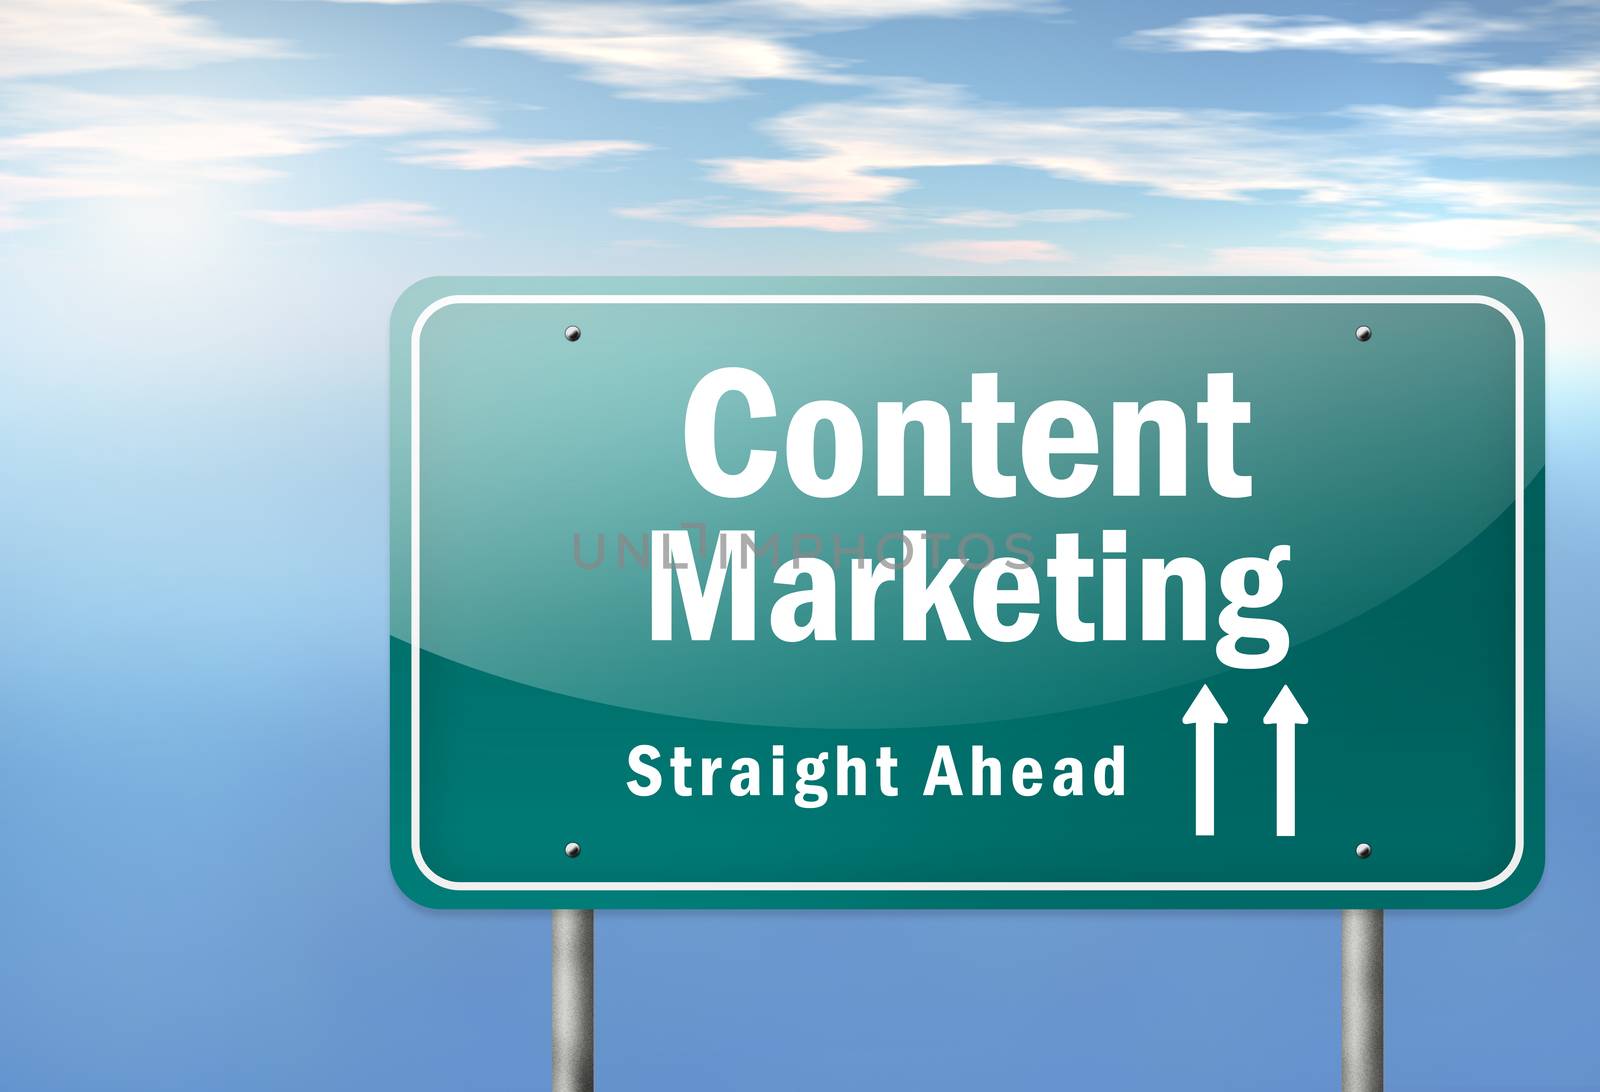 Highway Signpost with Content Marketing wording